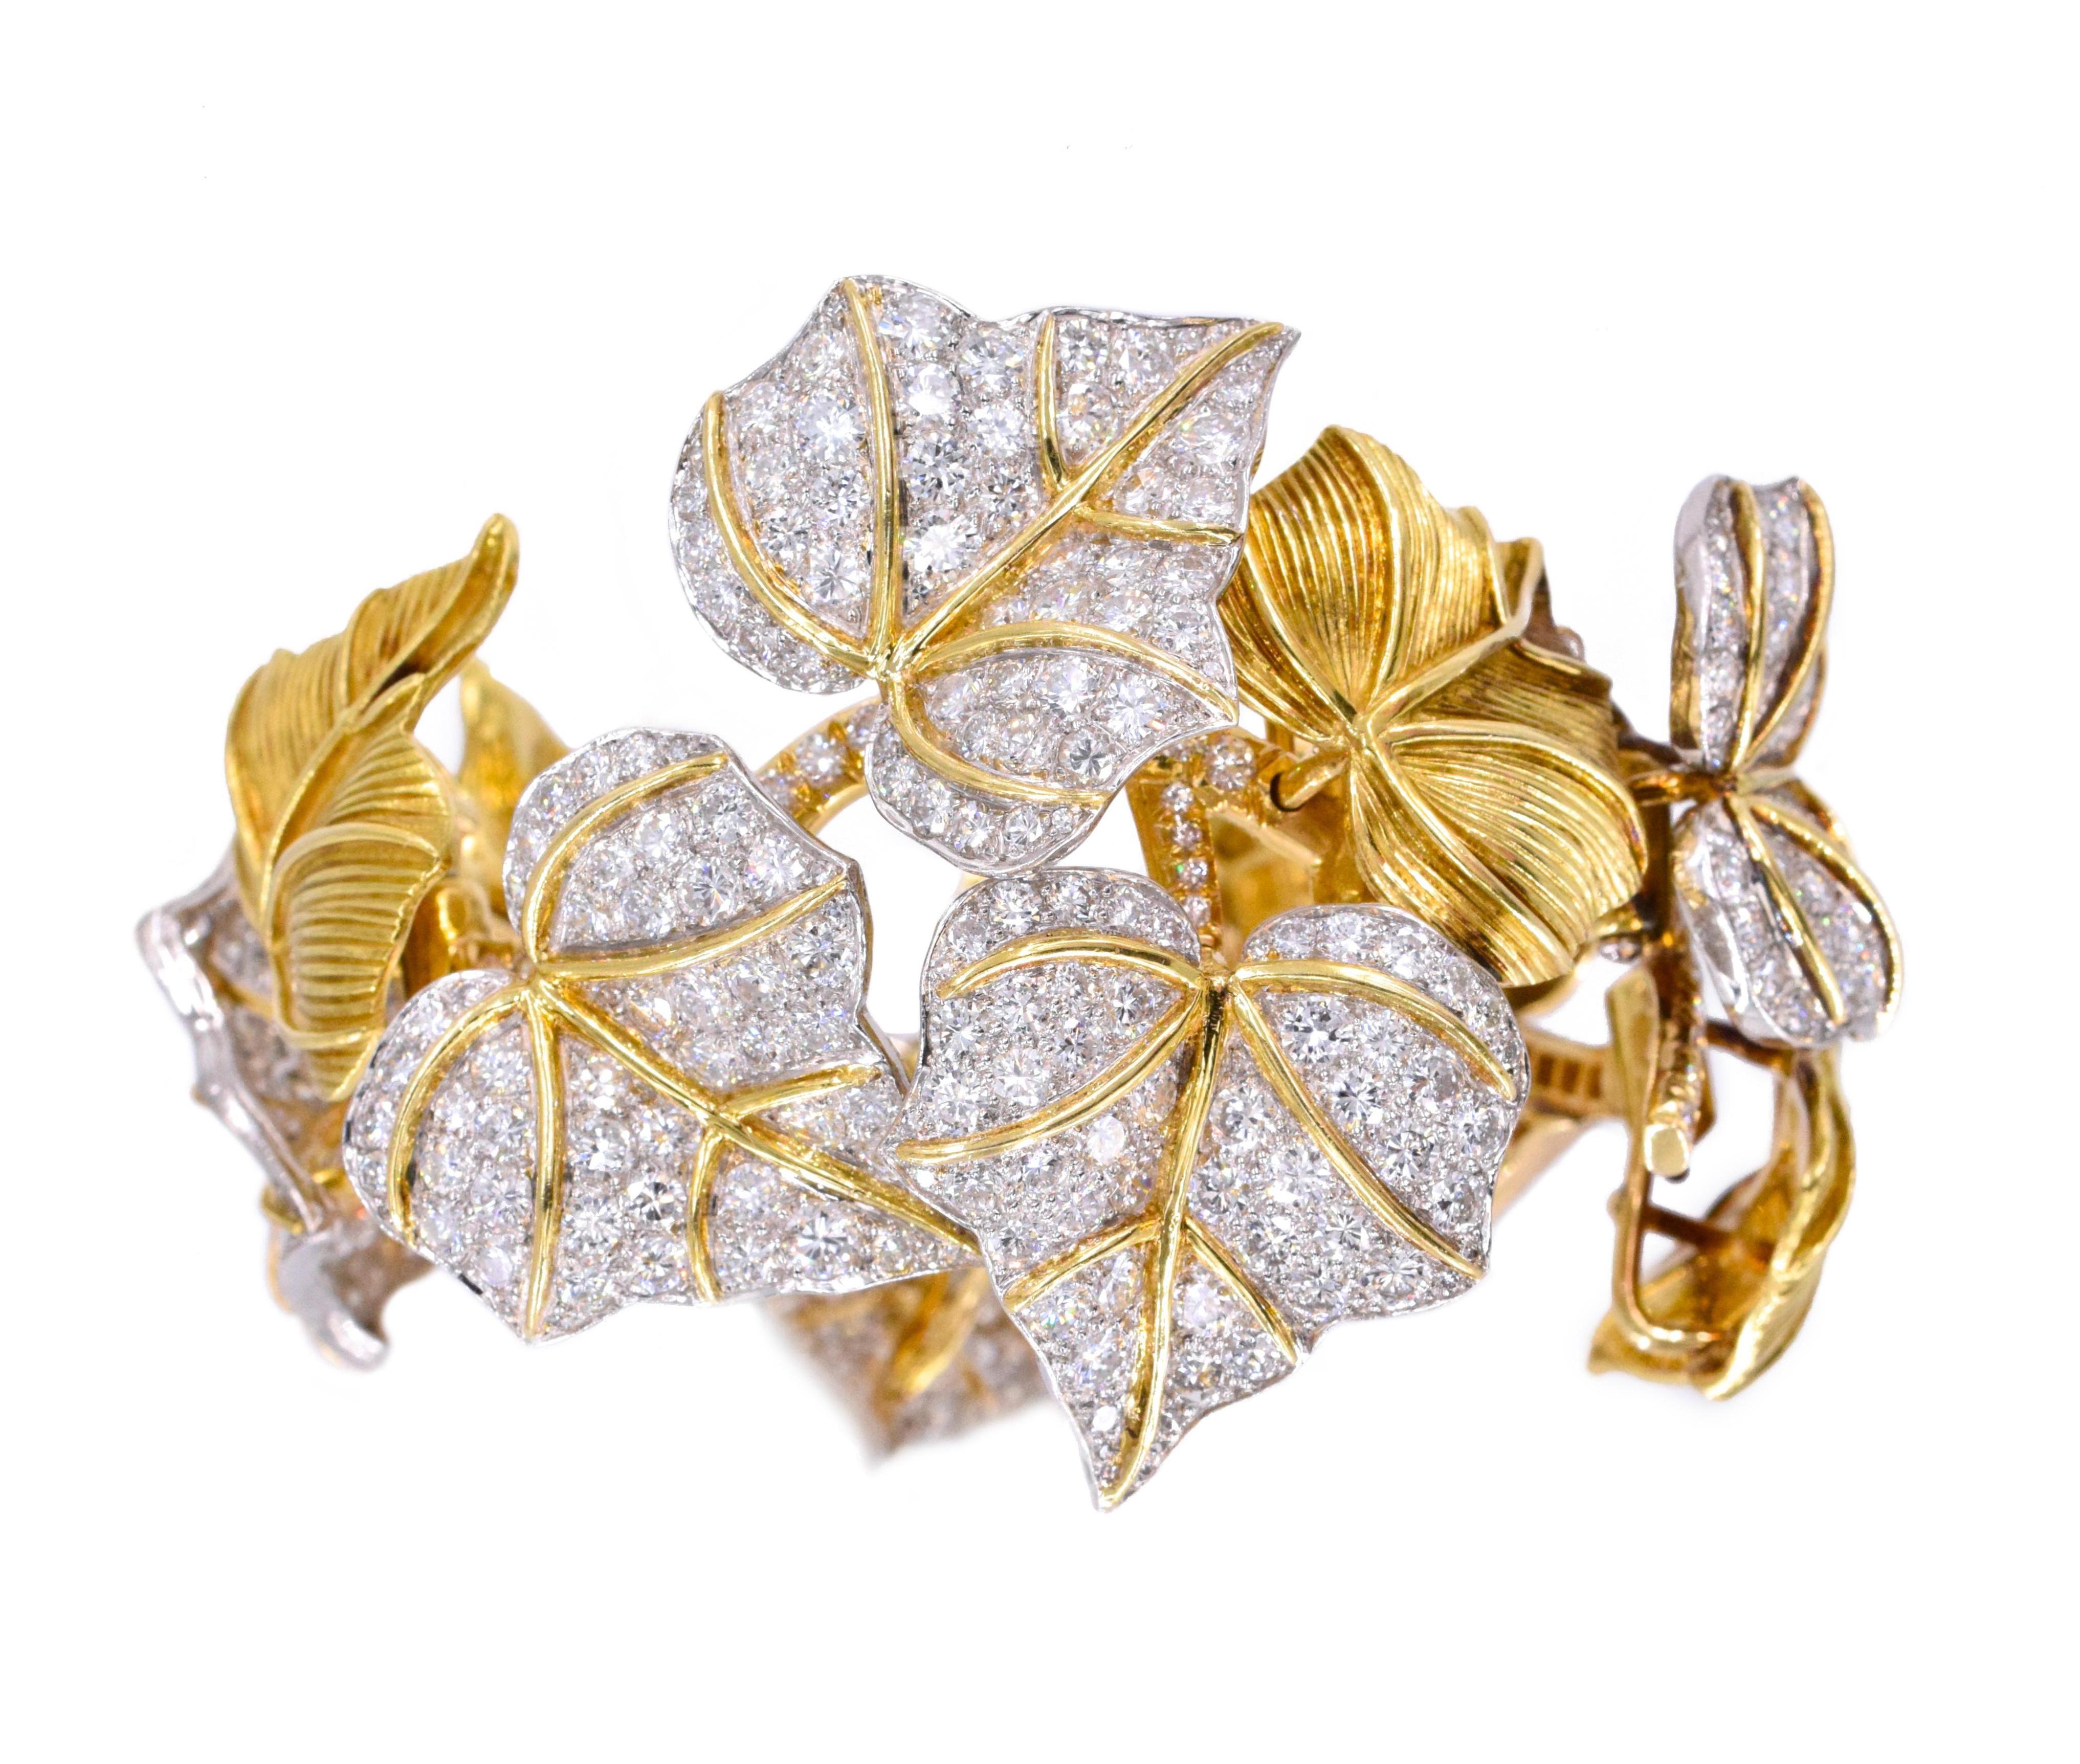 Gold and diamond bracelet
 Designed as a branch of ivy leaves of textured gold and set with brilliant-cut diamonds,
Diamonds estimated to weigh a total of approximately 20 carats, diamonds are near colorless & VS clarity
Gold weight is approximately